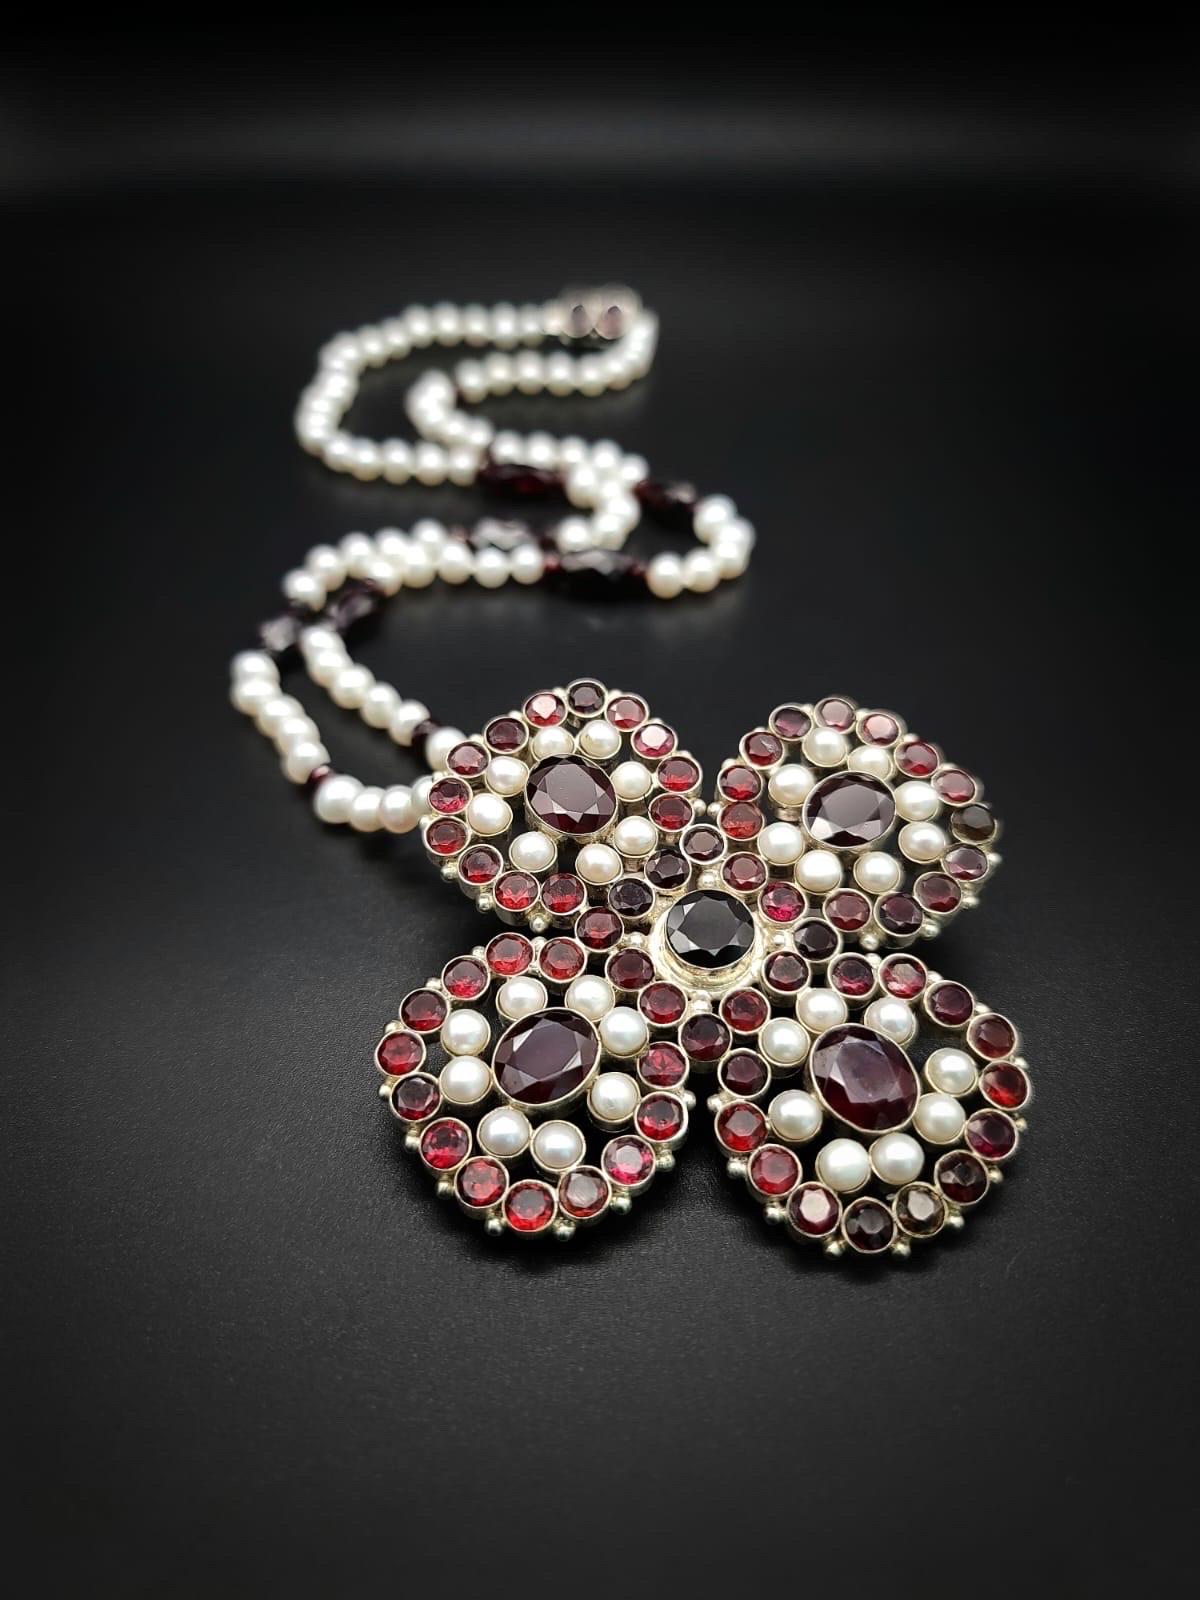 One-of-a-Kind

Stunning garnet and pearl cross (3”x 3”), each stone set in heavy Sterling Silver, serves as an anchor for a 27” necklace of 4-5 m.m Pearls interspersed between facetted Garnets. 
The clasp is 2 garnets set in silver.

The pomegranate